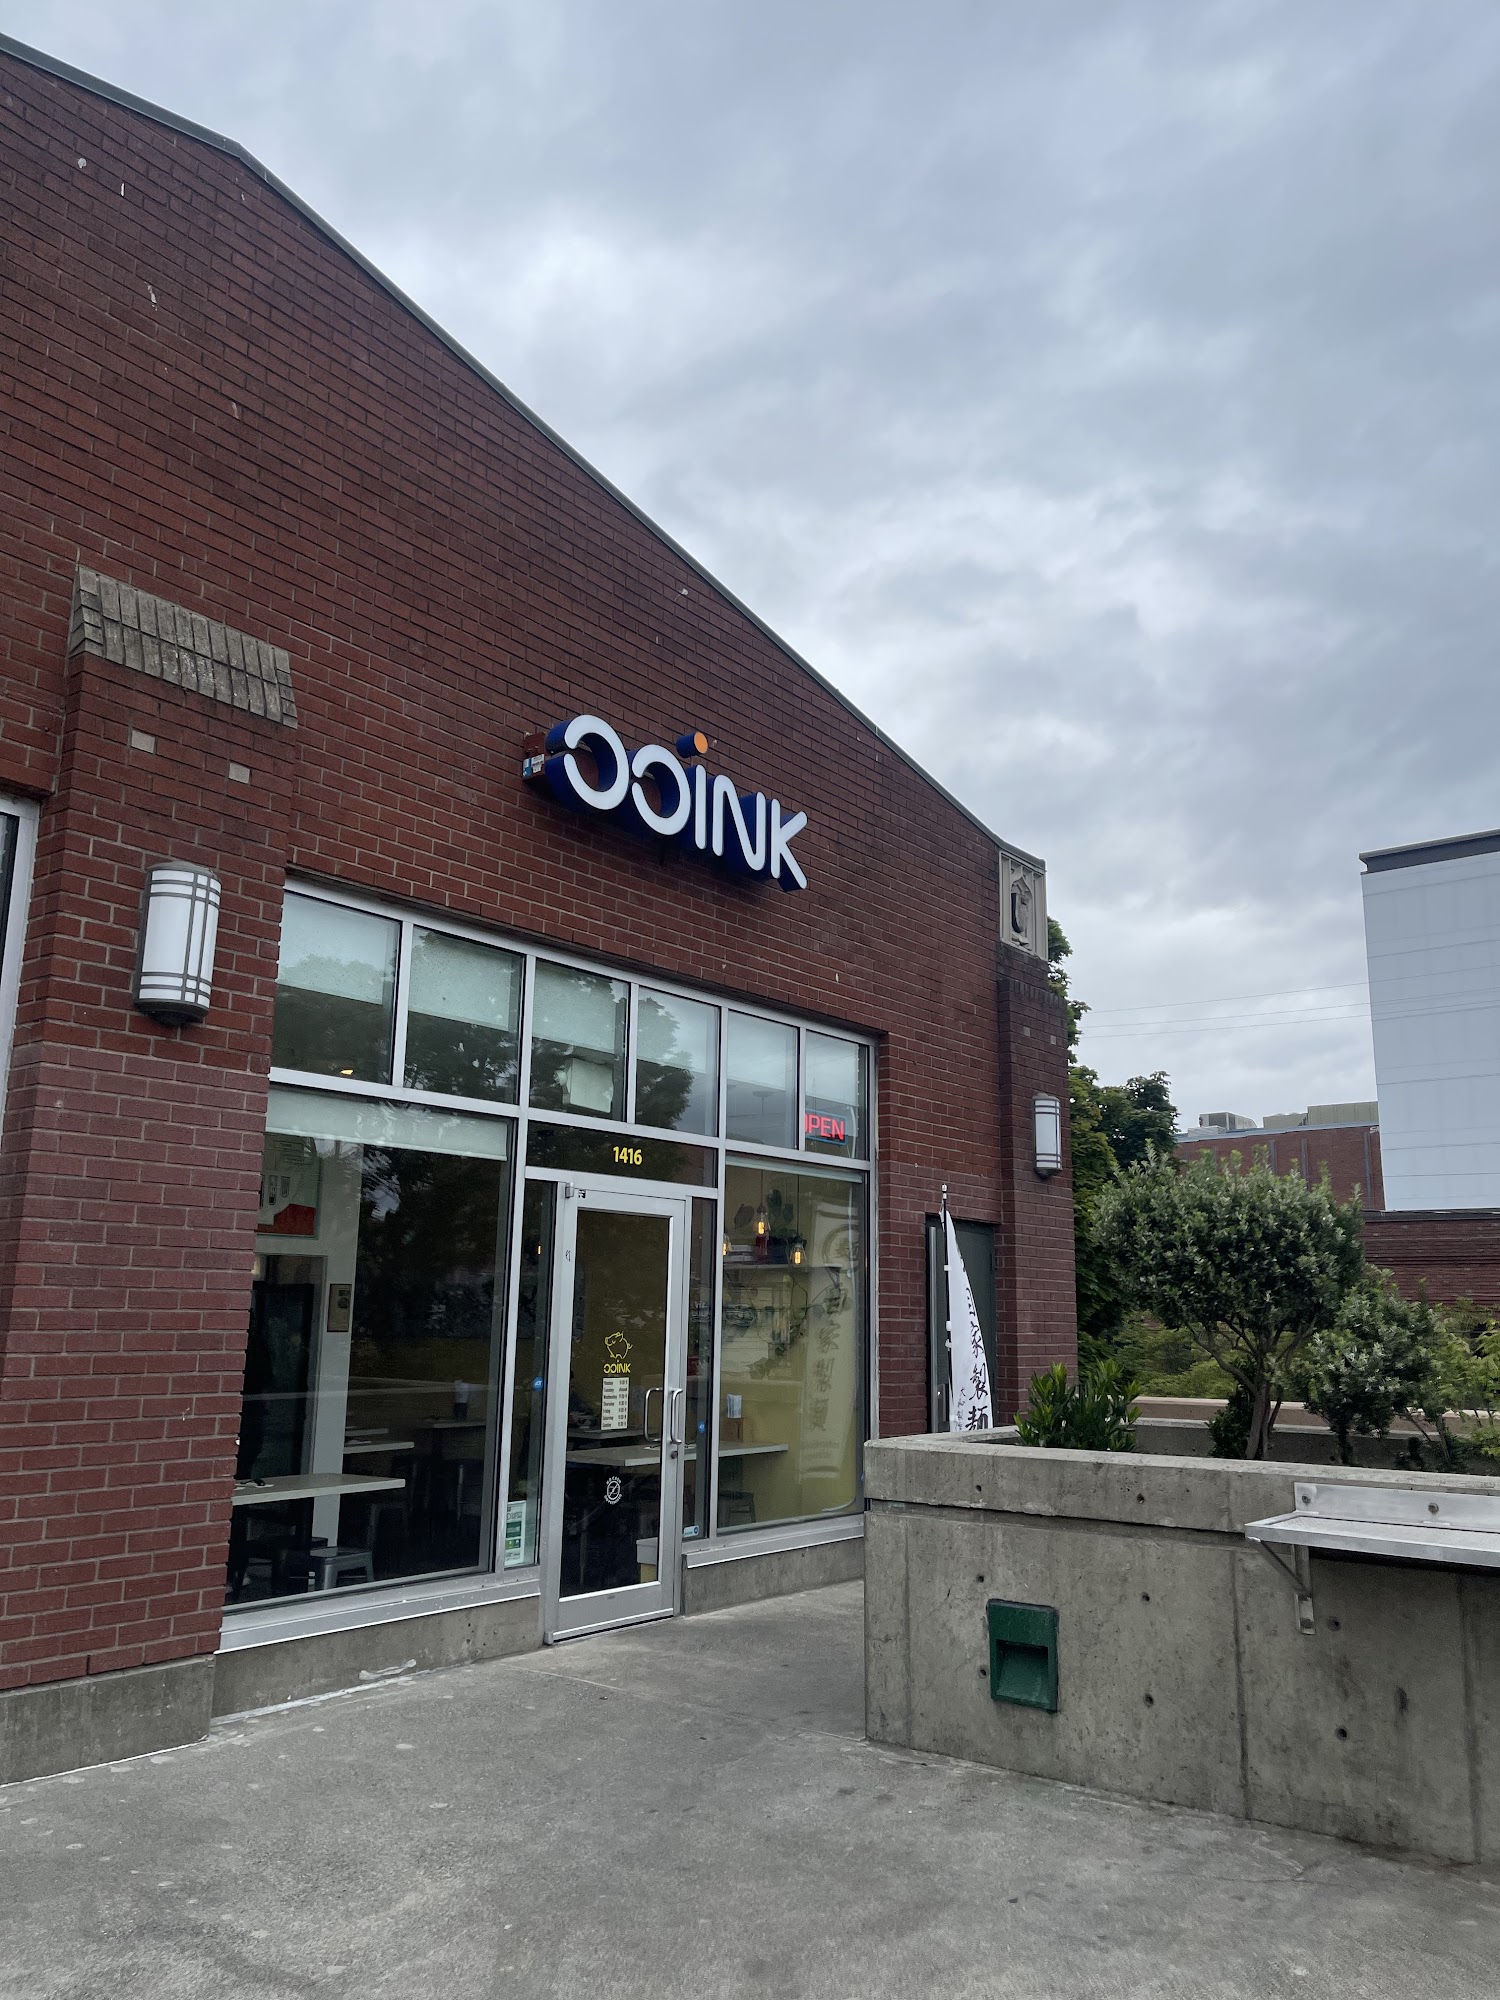 Ooink Capitol Hill